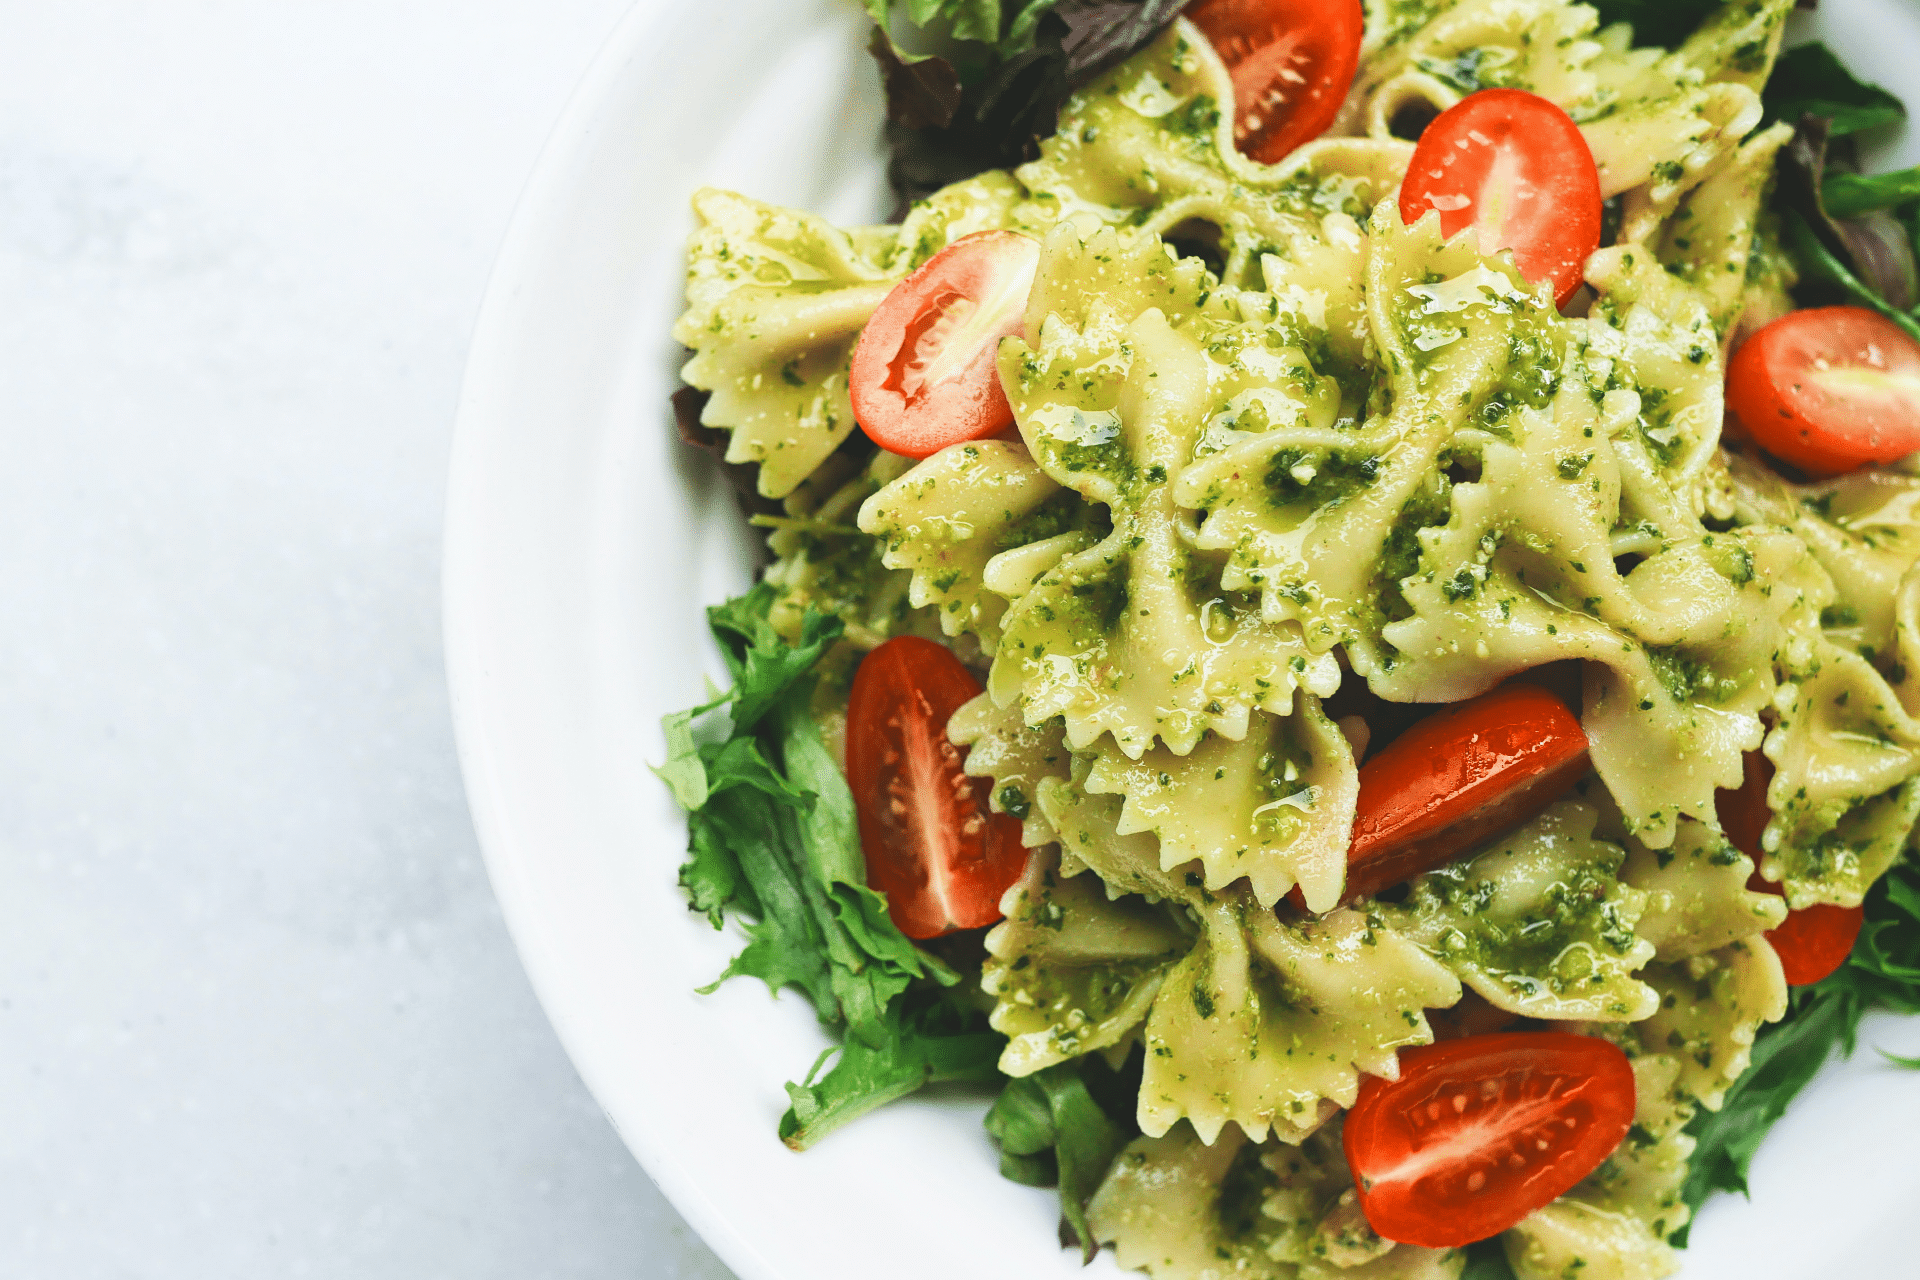 bowtie pasta with pesto and cherry tomatoes in a bowl